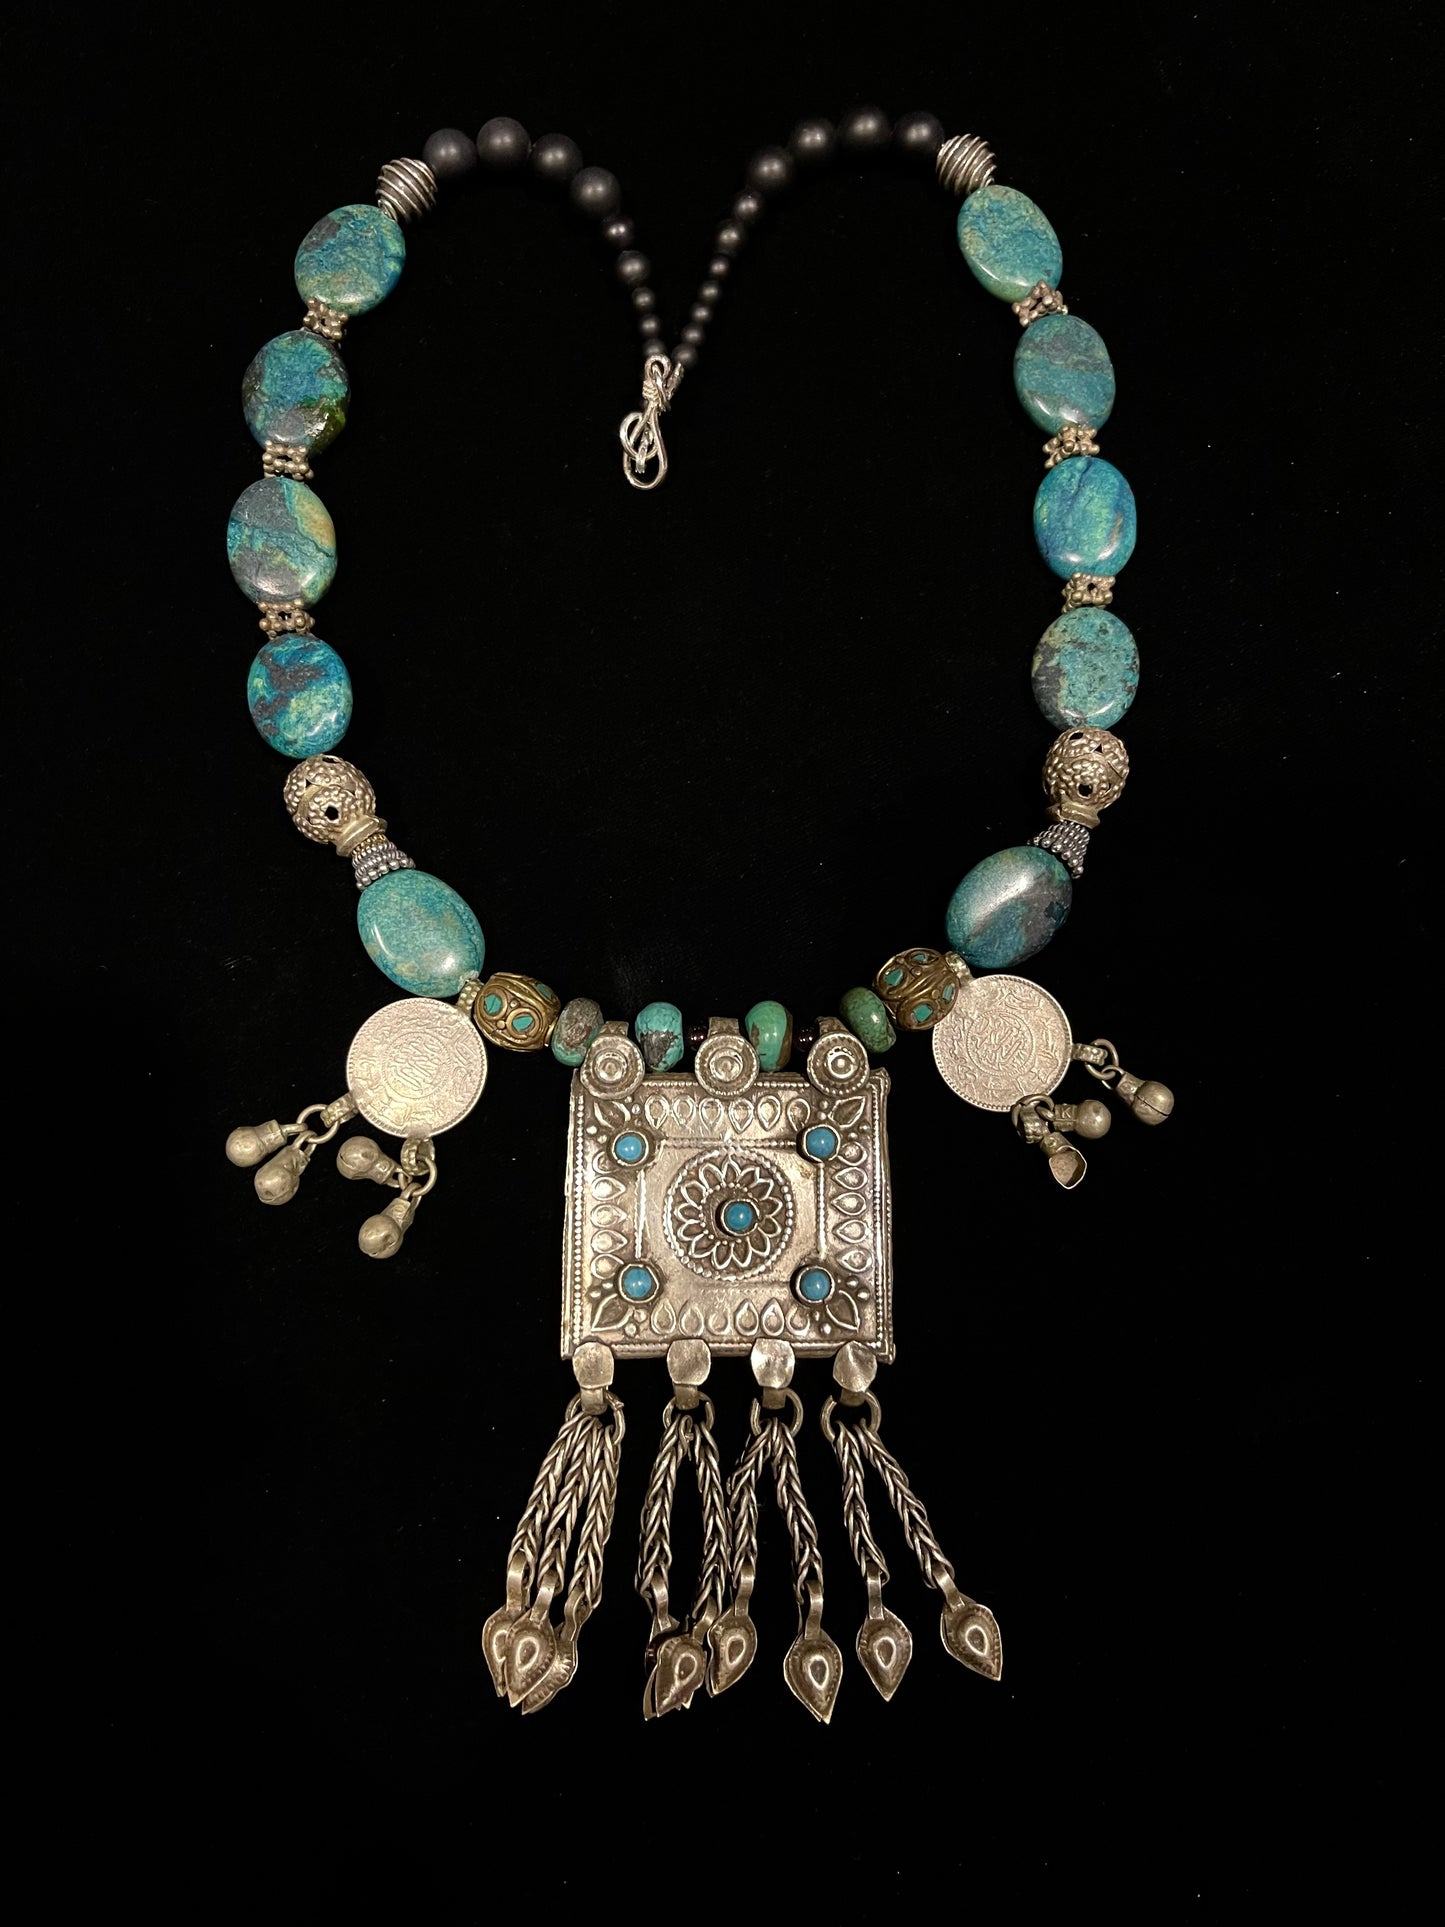 Afghan turquoise necklace